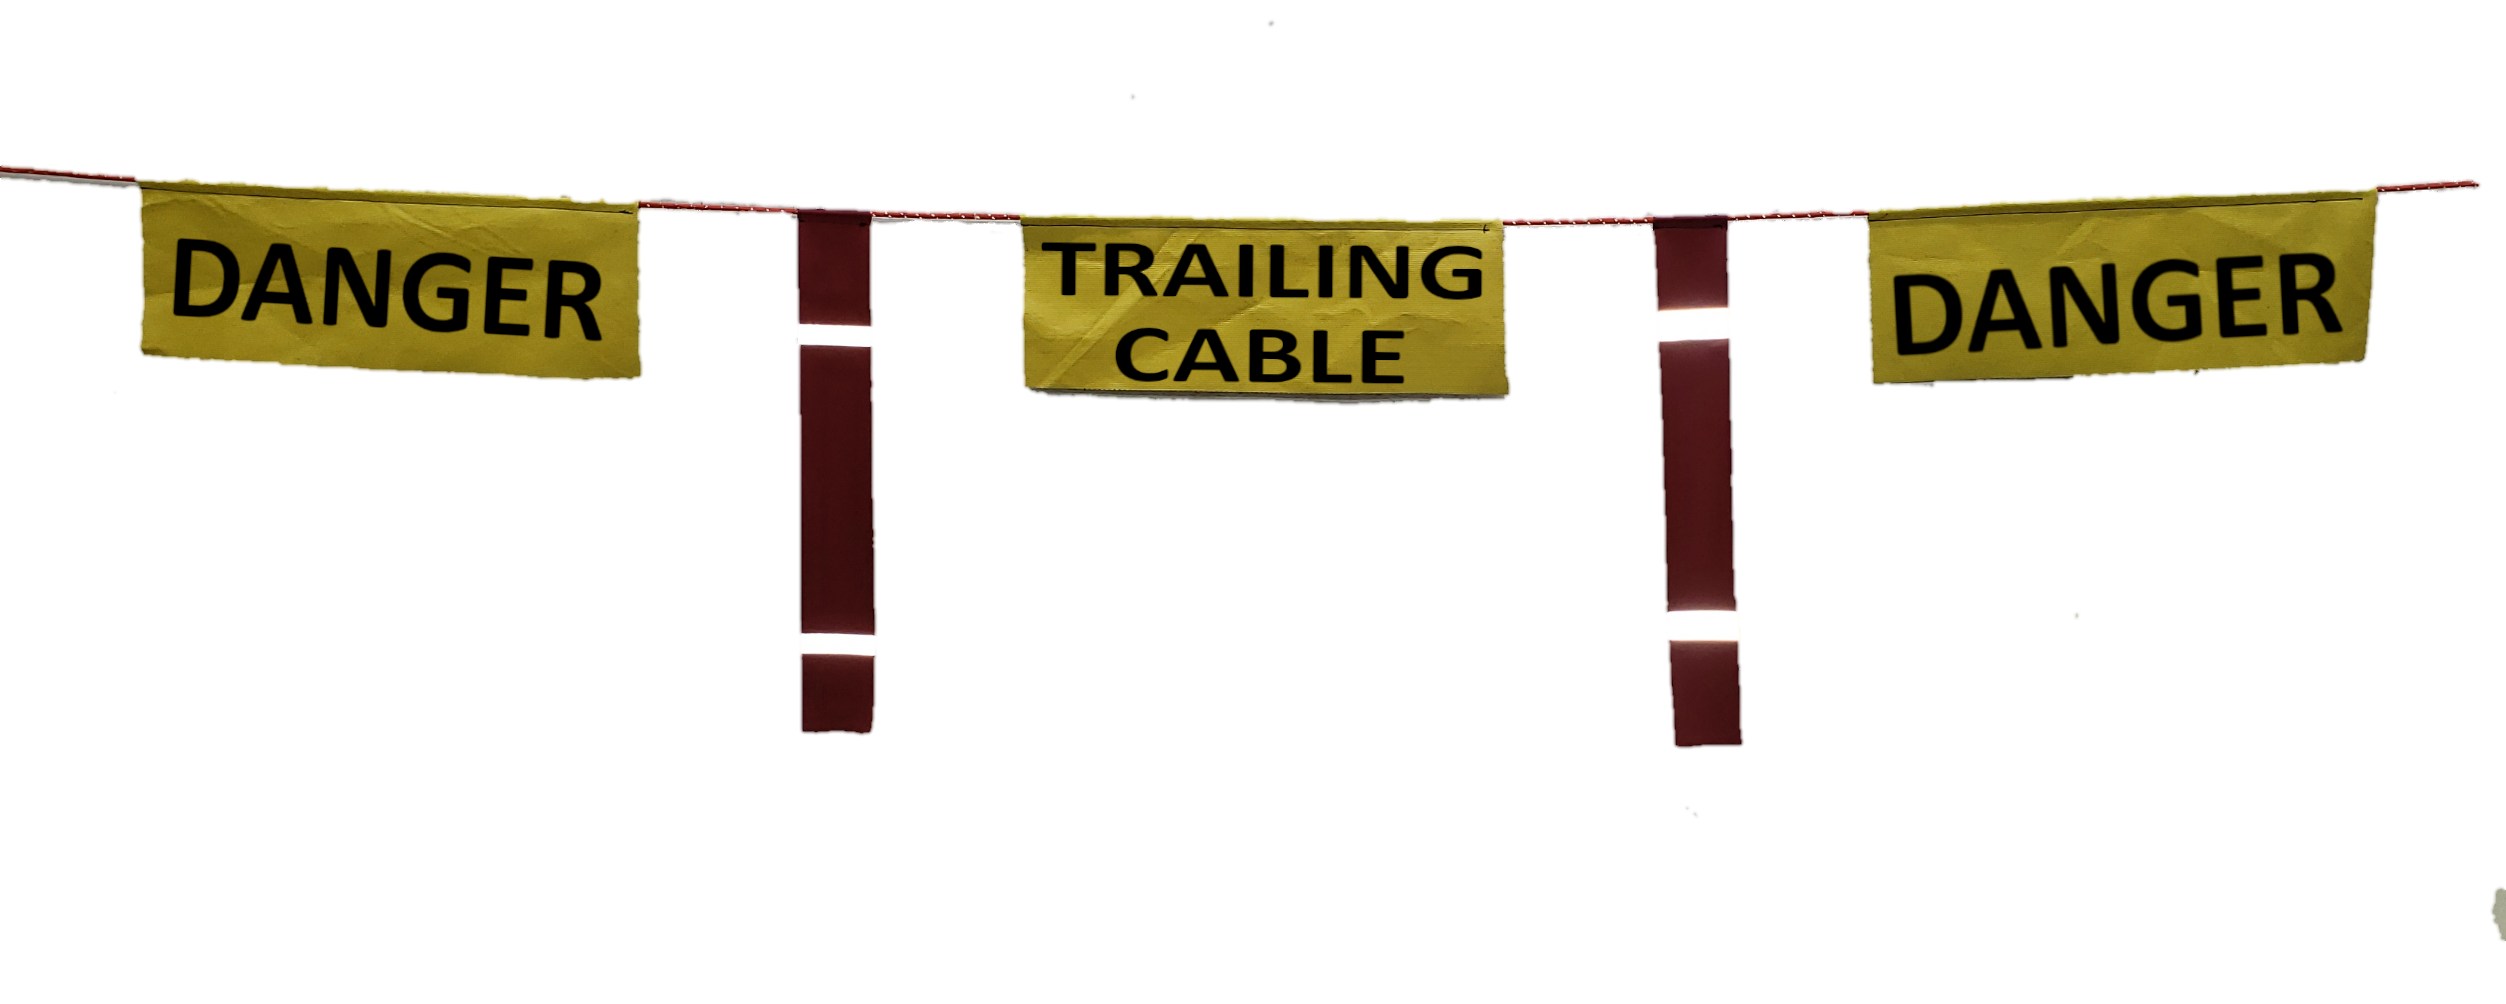 TRAILING CABLE BARRICADE